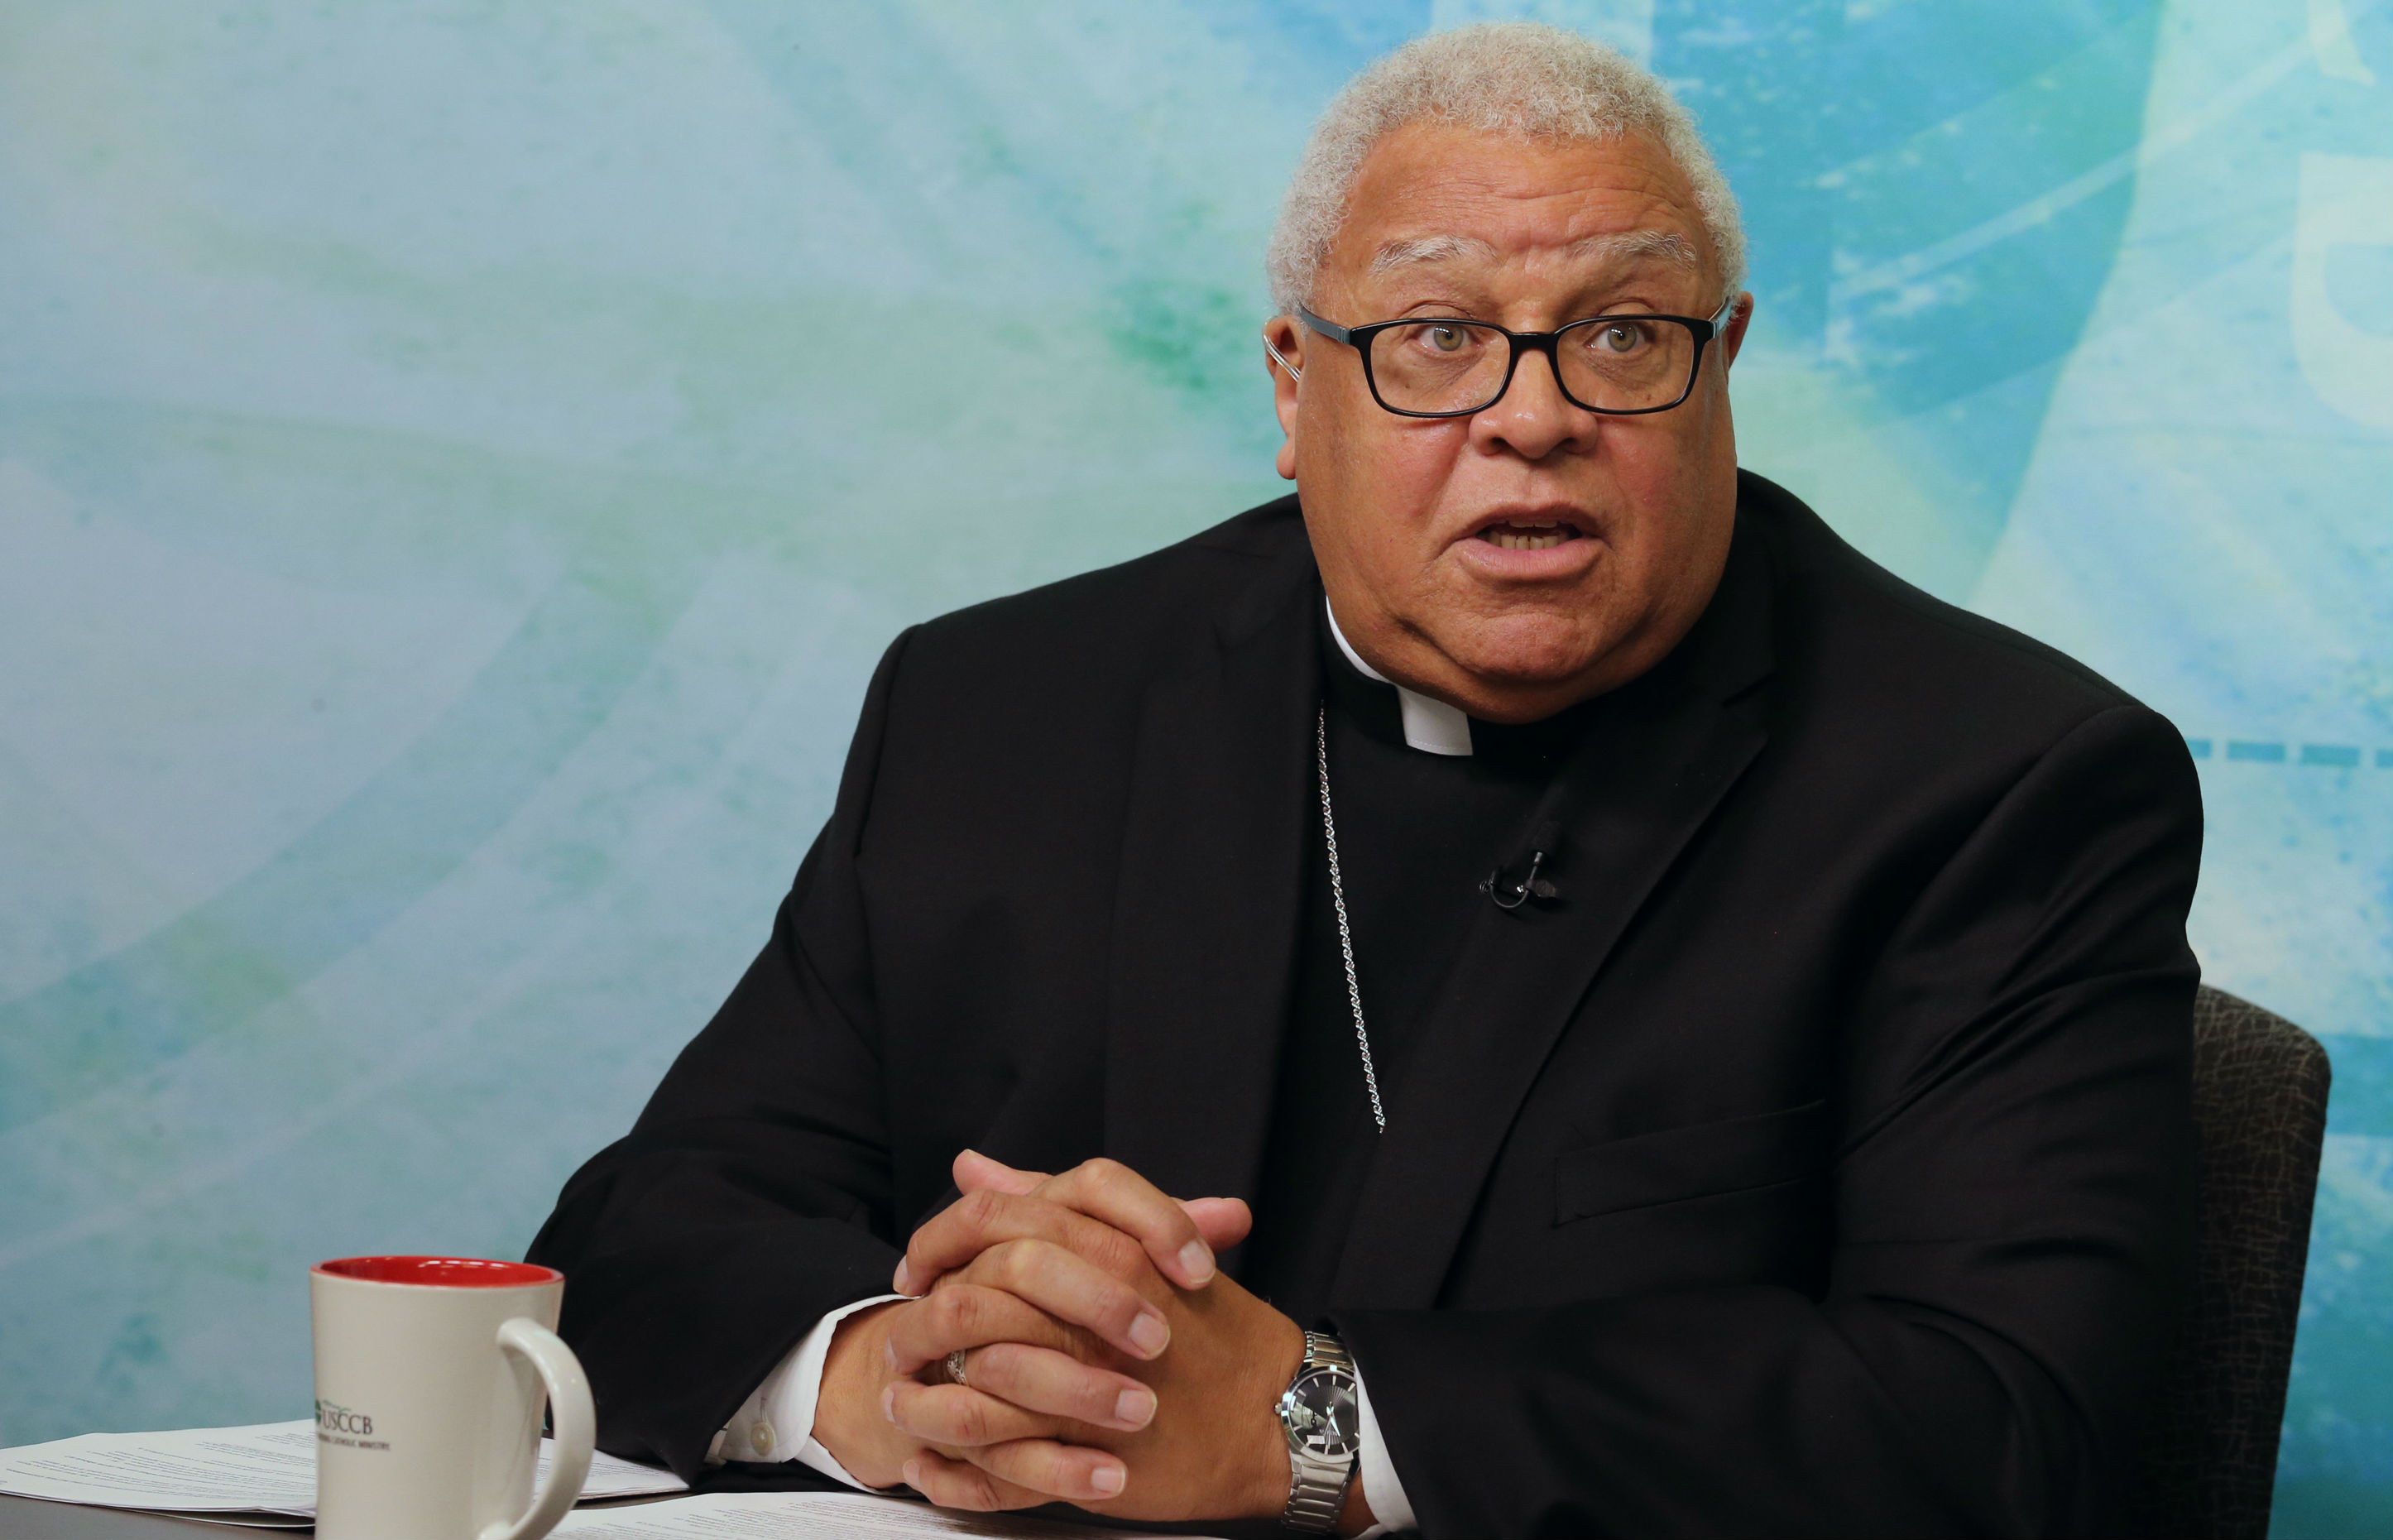 US bishops form new body to address 'sin of racism' that 'afflicts' nation